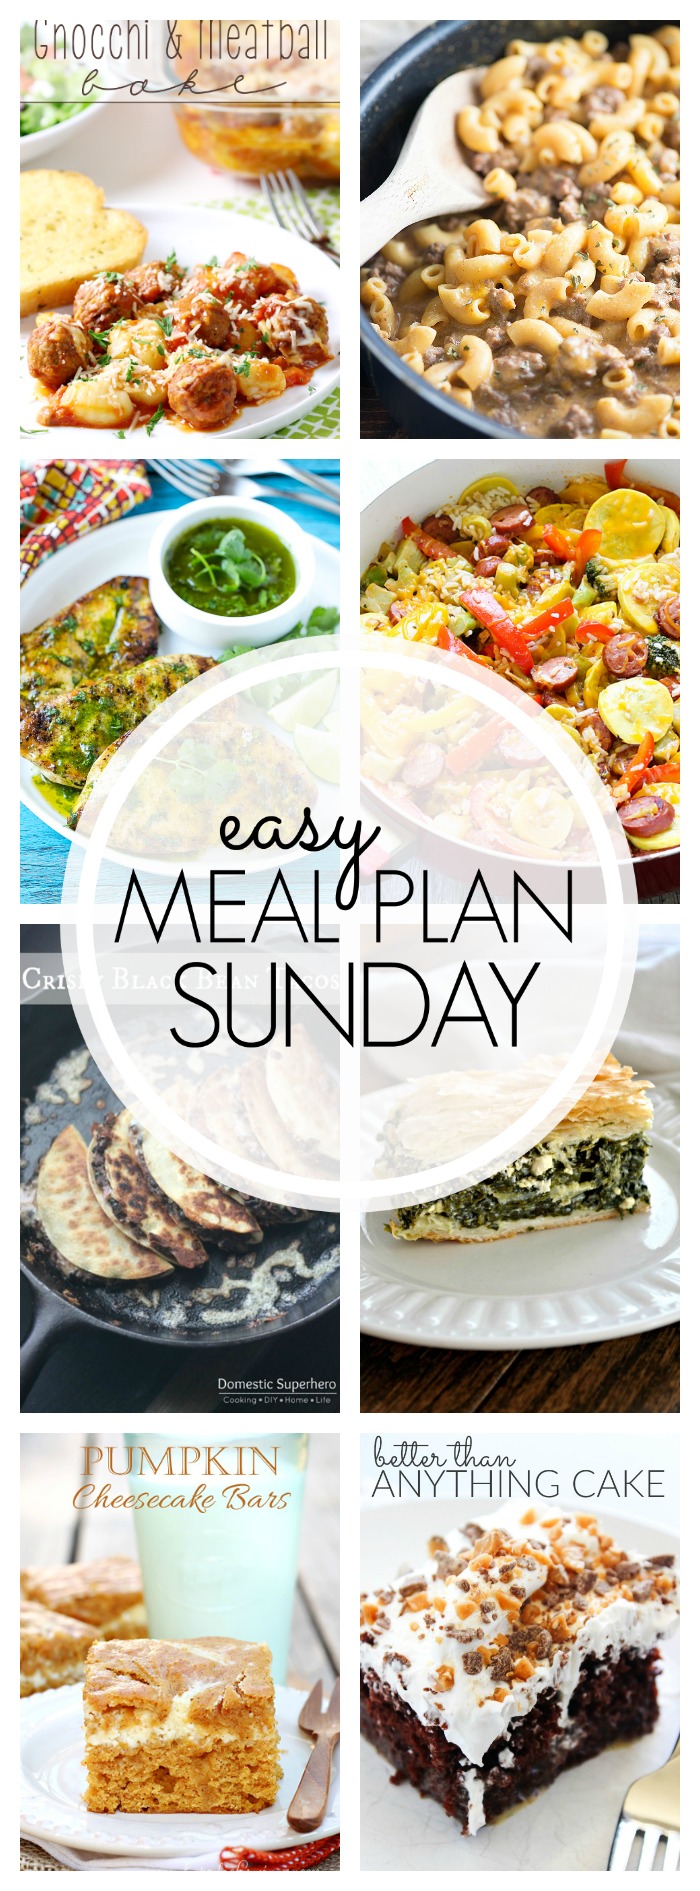 Easy Meal Plan Sunday #67